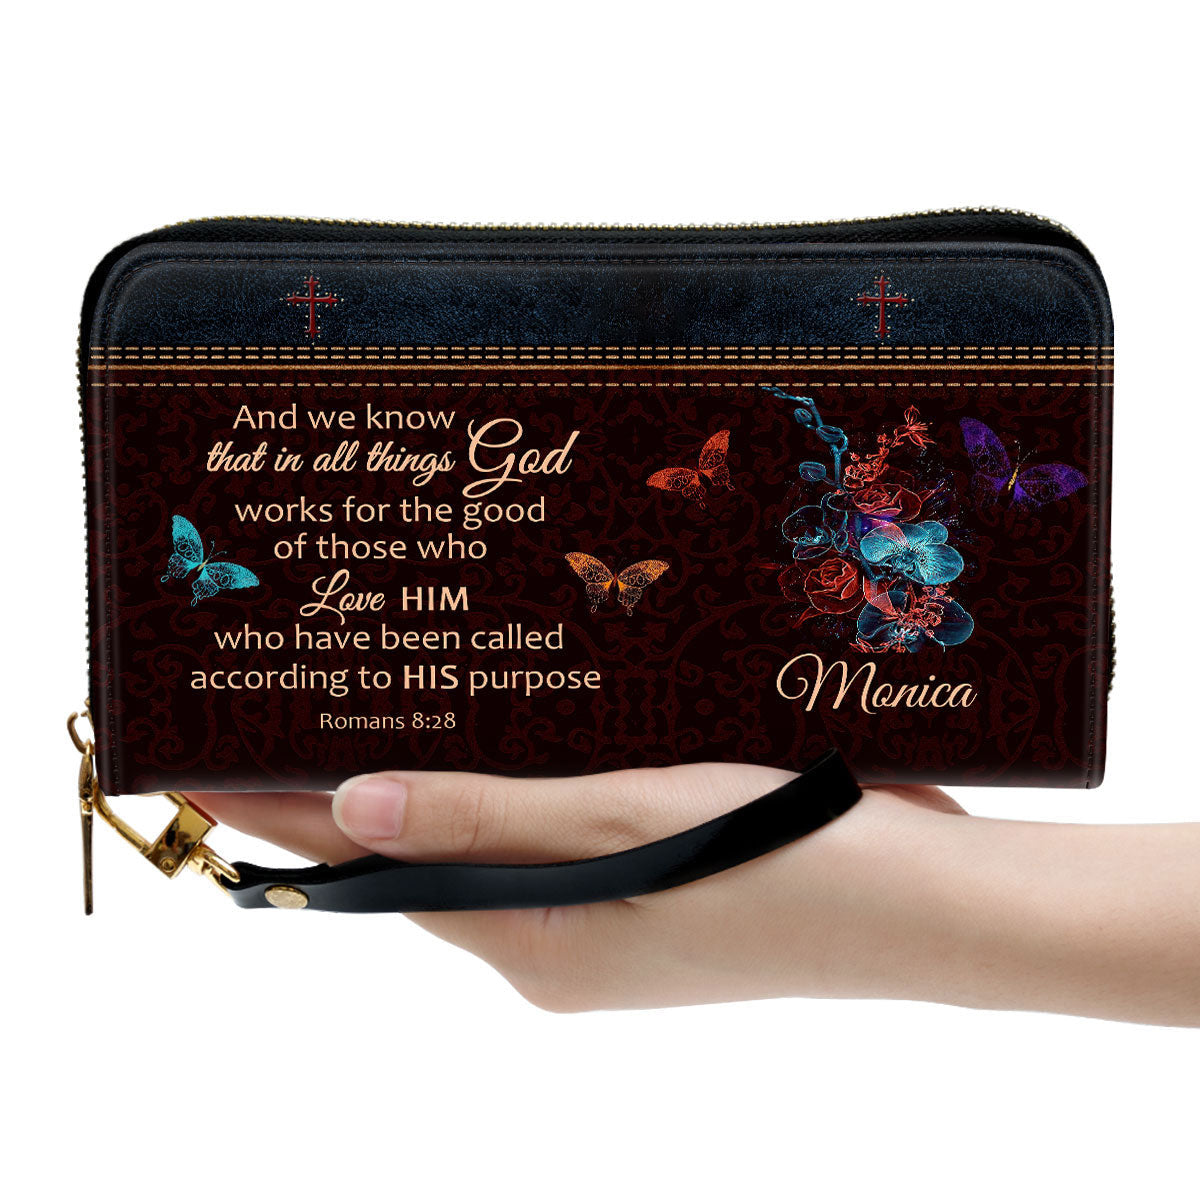 We Know That In All Things God Works Clutch Purse For Women - Personalized Name - Christian Gifts For Women